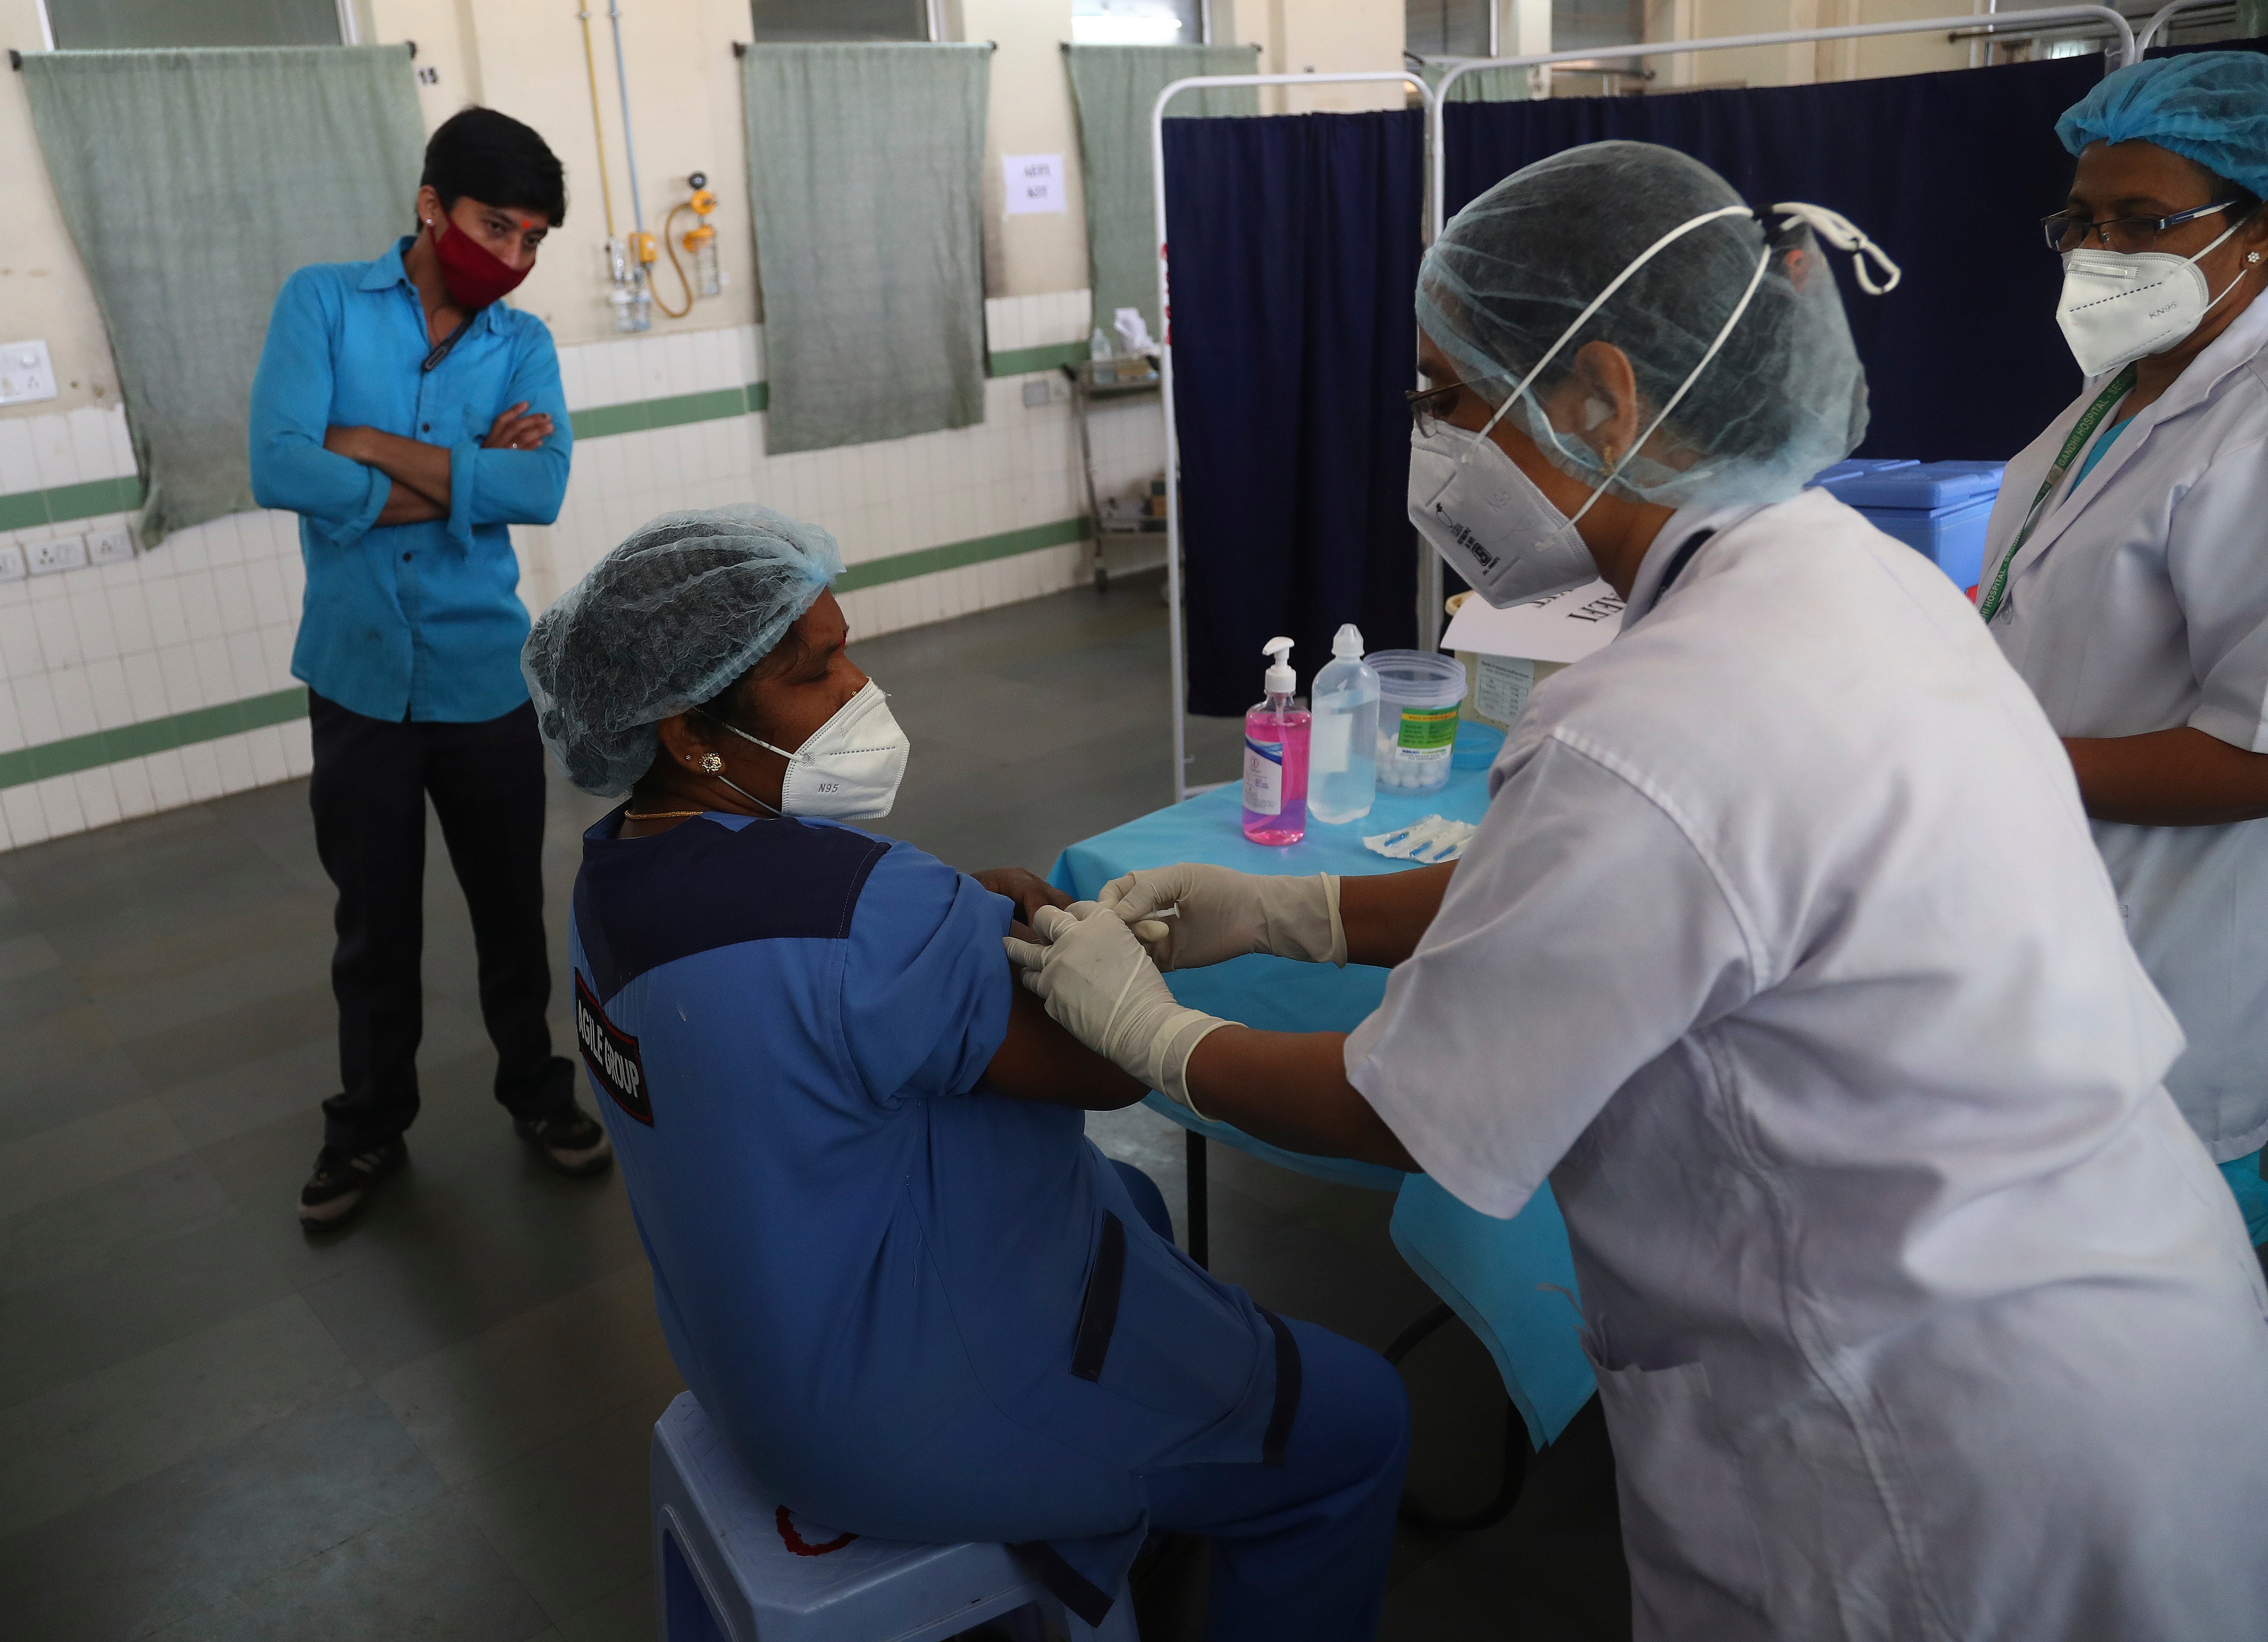 Health workers participate in a COVID-19 vaccine delivery system trial in Hyderabad, India, Saturday, Jan. 2, 2021